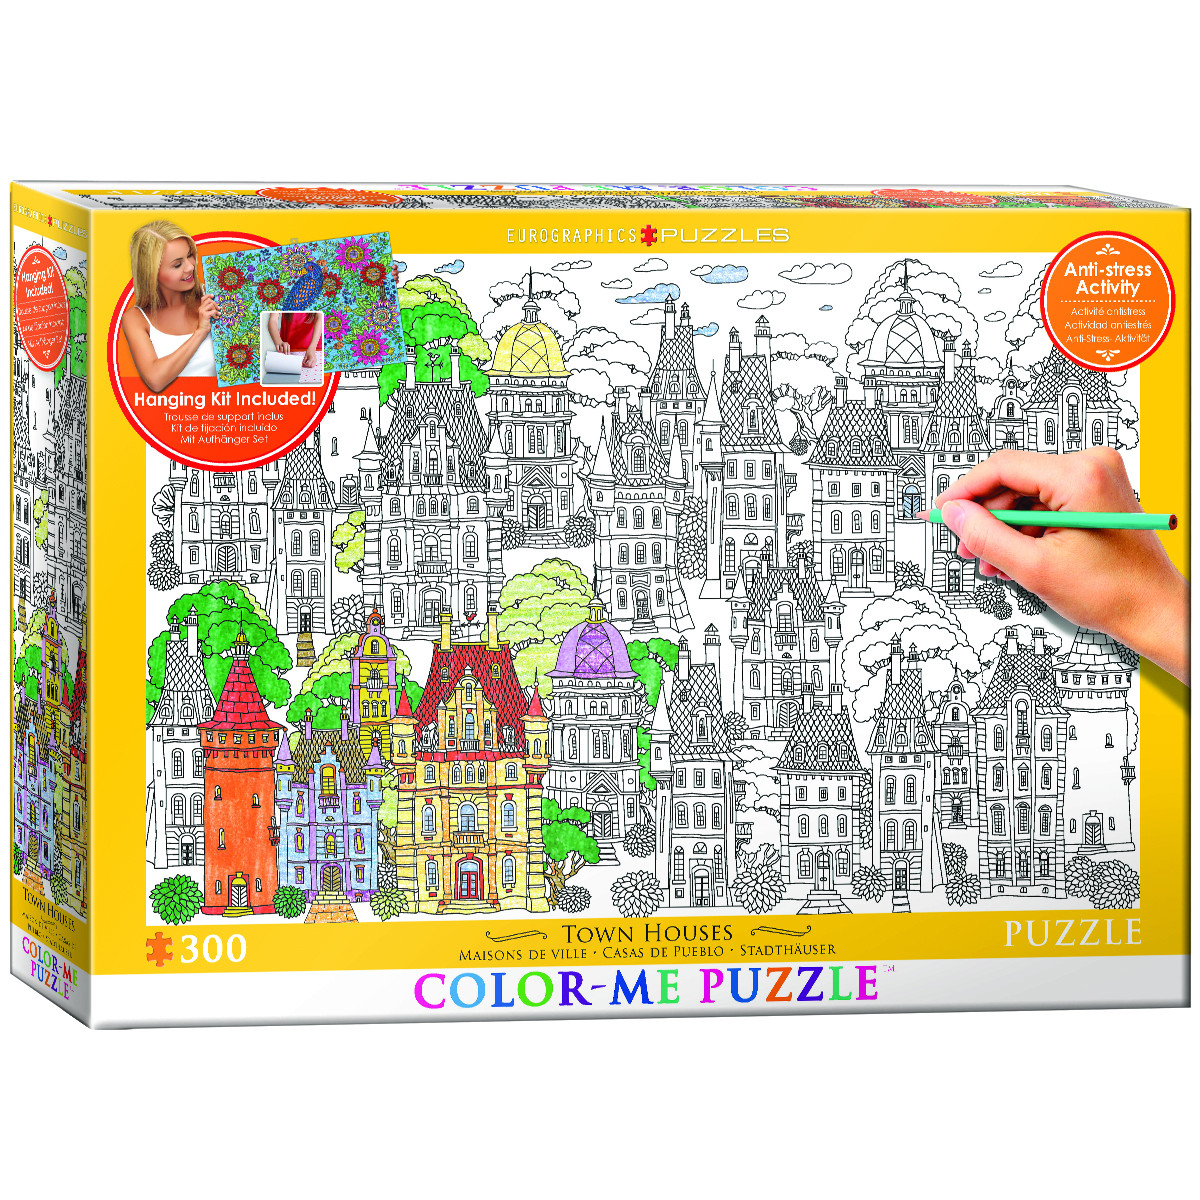 Town Houses (Color-Me Puzzle) Around the House Jigsaw Puzzle